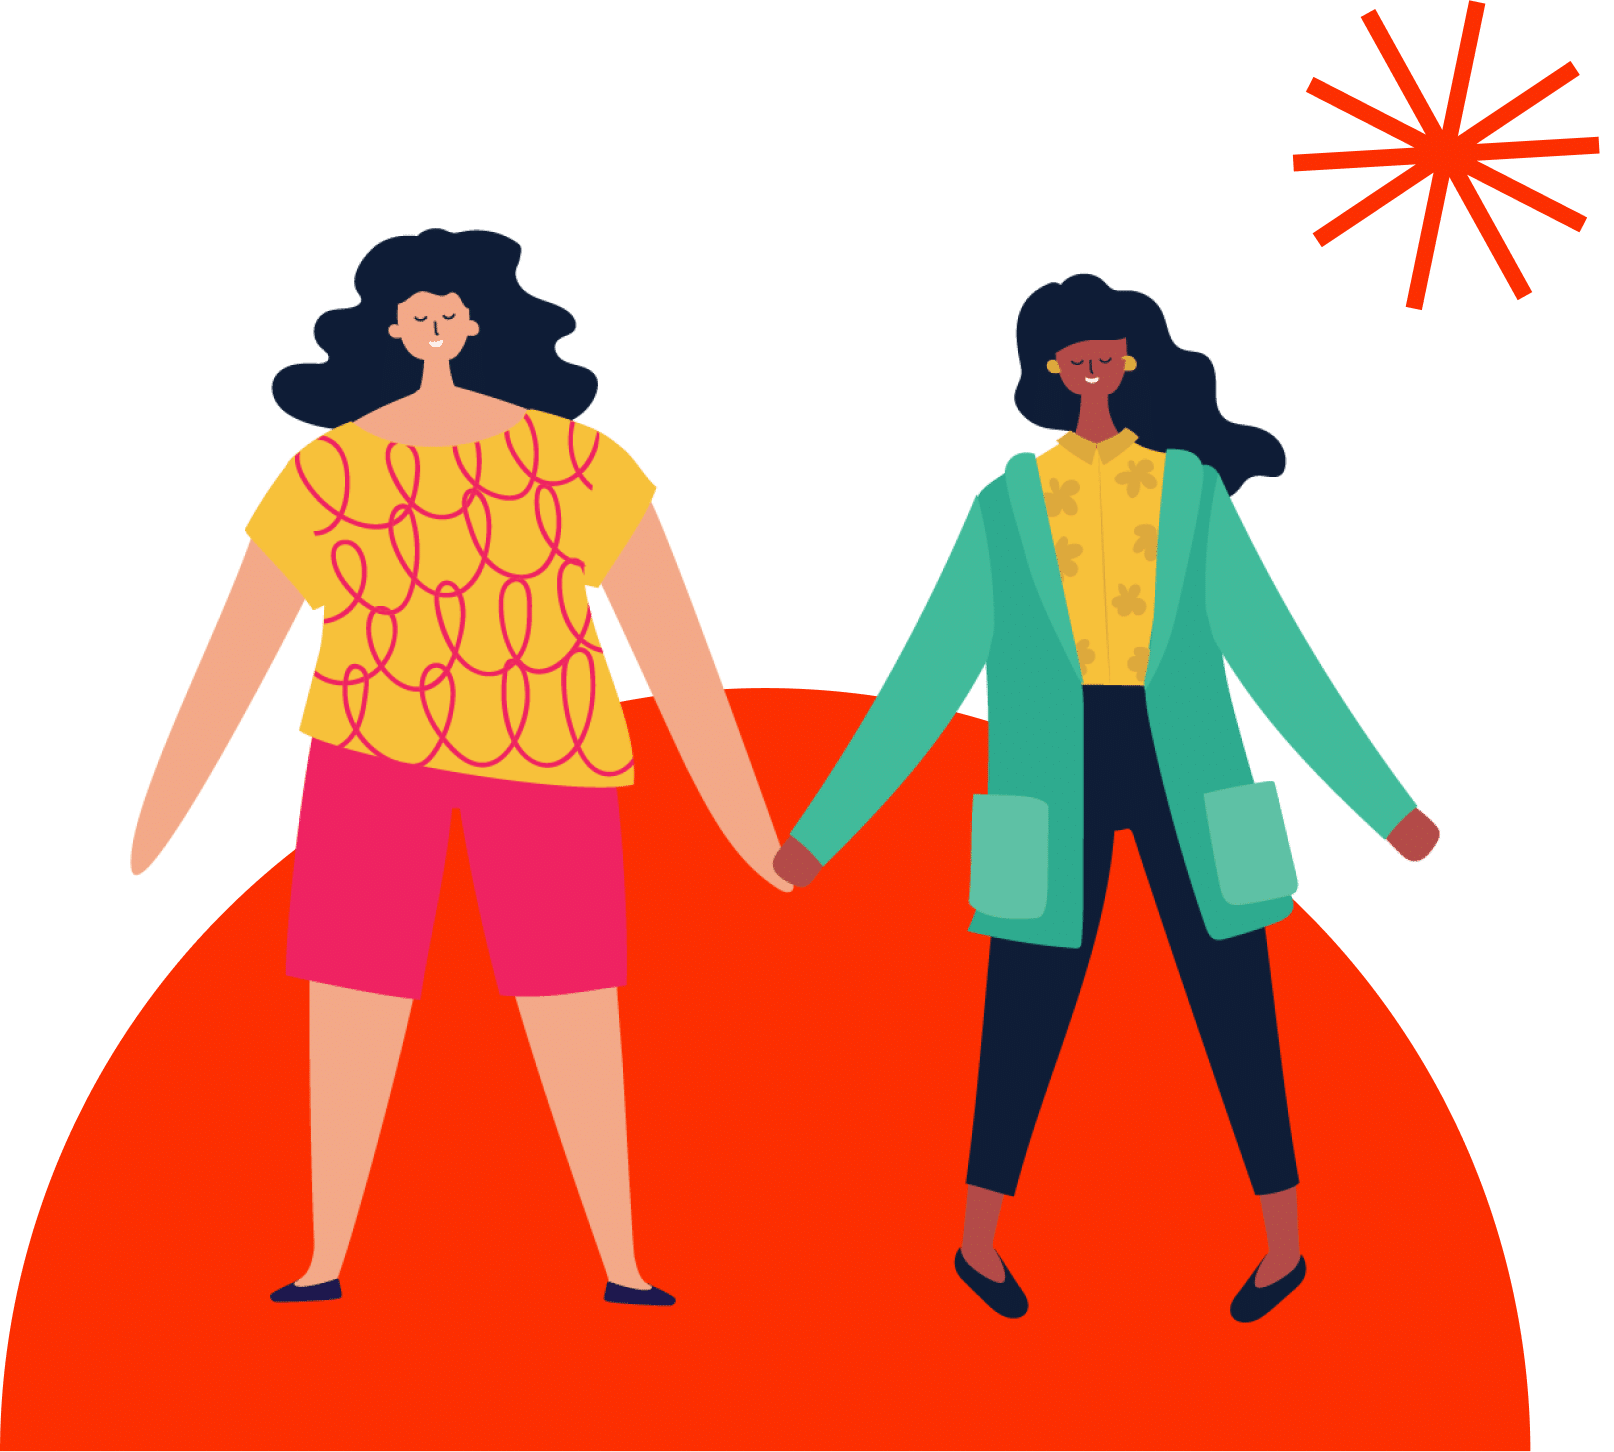 An illustration of two women holding hands with orange graphics in the bacgkround.